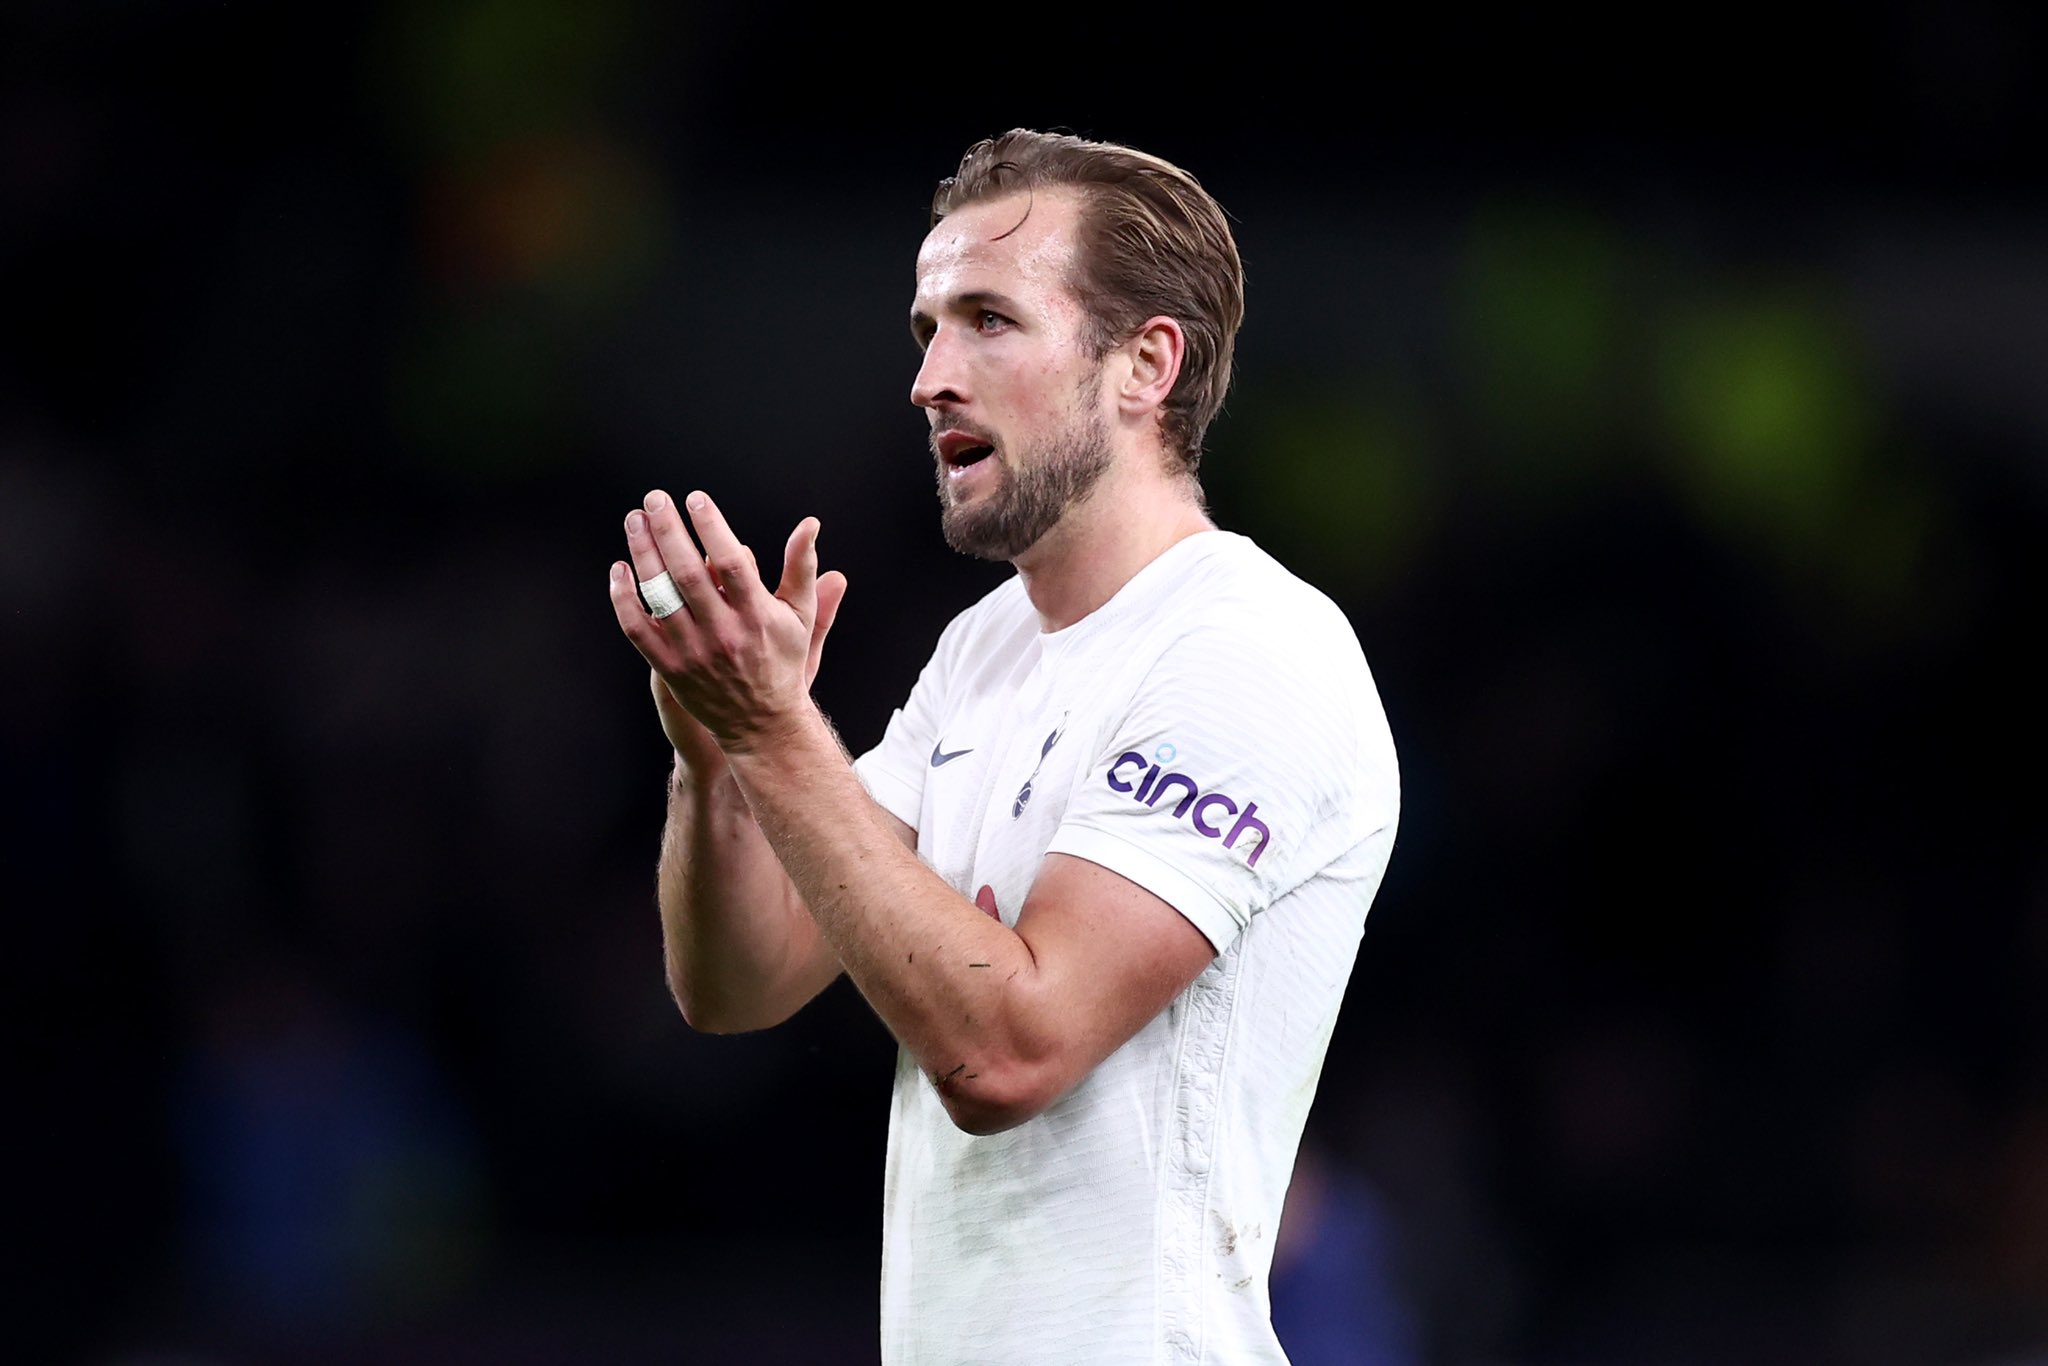 Think Harry Kane is likely to win something at Tottenham rather than Manchester United, proclaims Teddy Sheringham